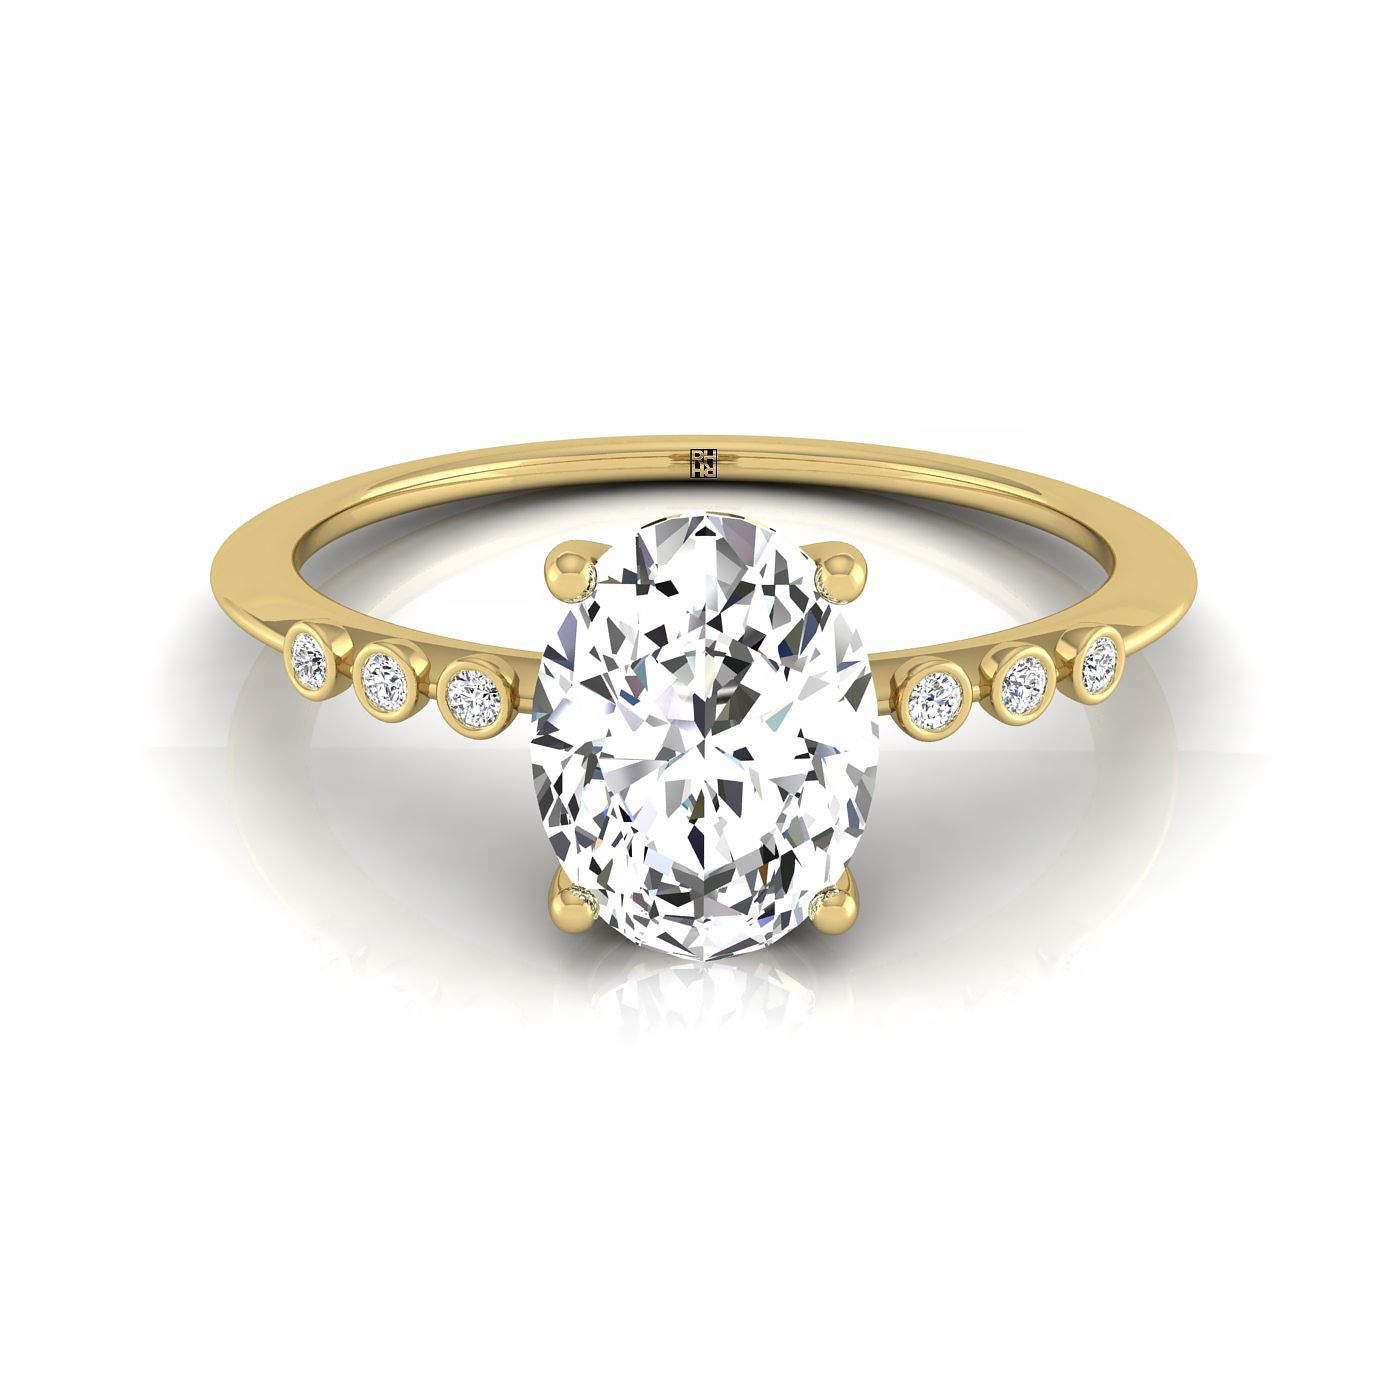 14ky Oval Engagement Ring With 6 Bezel Set Round Diamonds On Shank